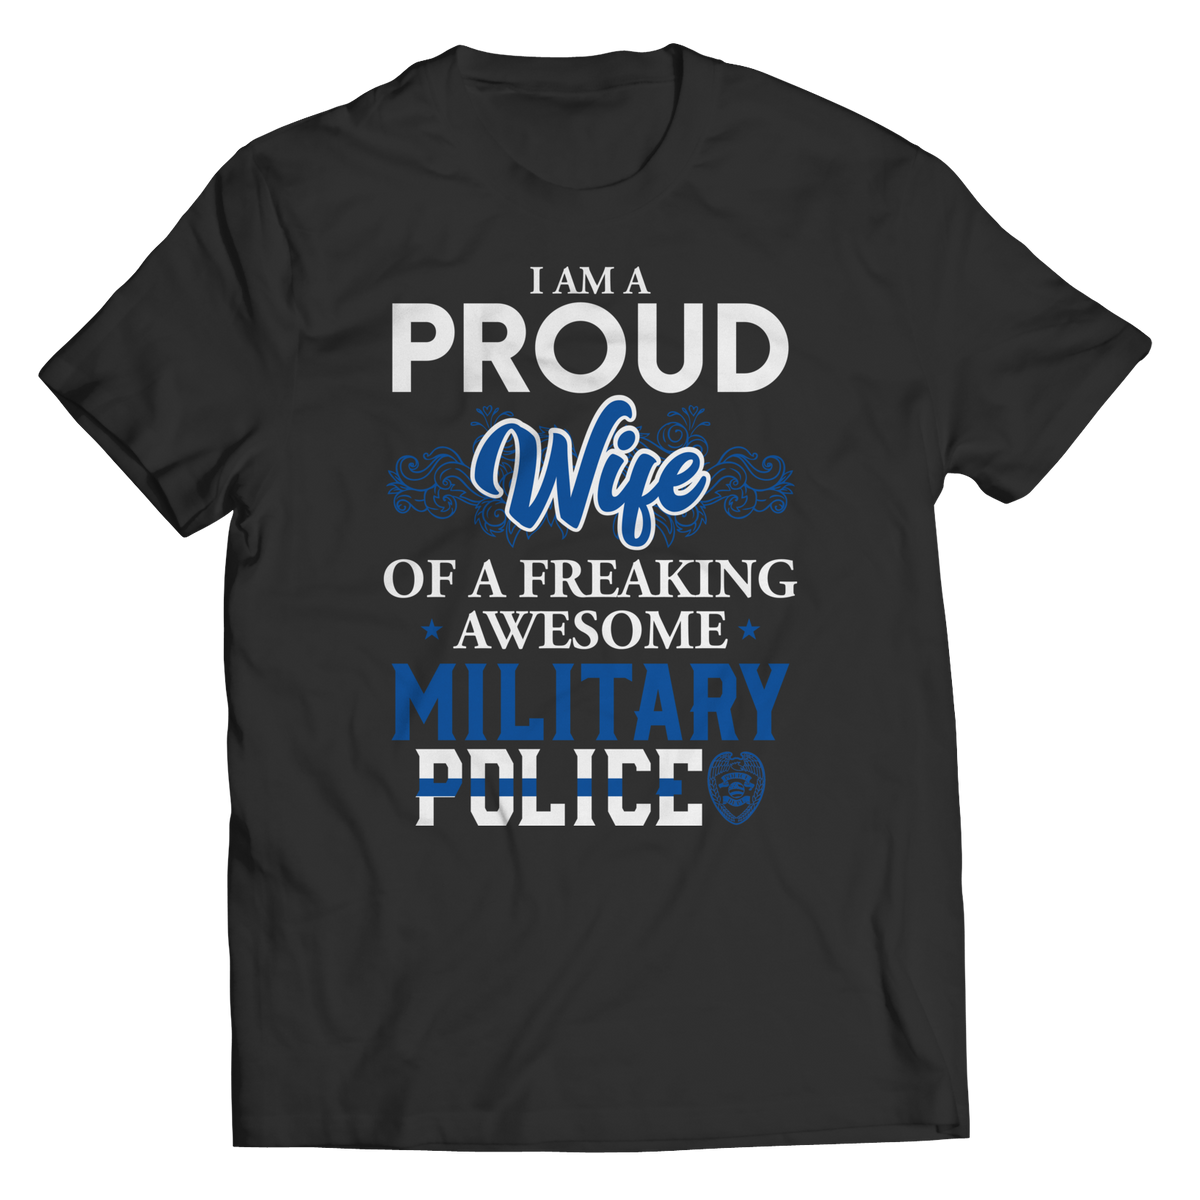 I'm A Proud Wife Of A Freaking Awesome Military Police  - Unisex Shirt